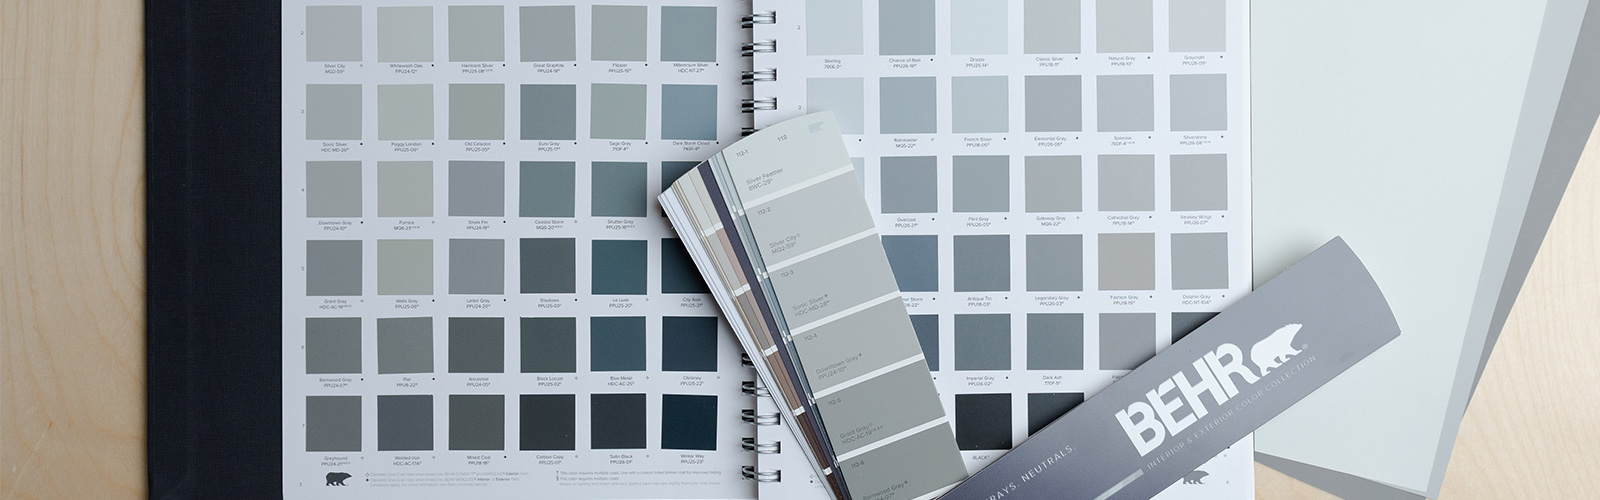 A large image of a BEHR Colour Fan Deck with colour book.